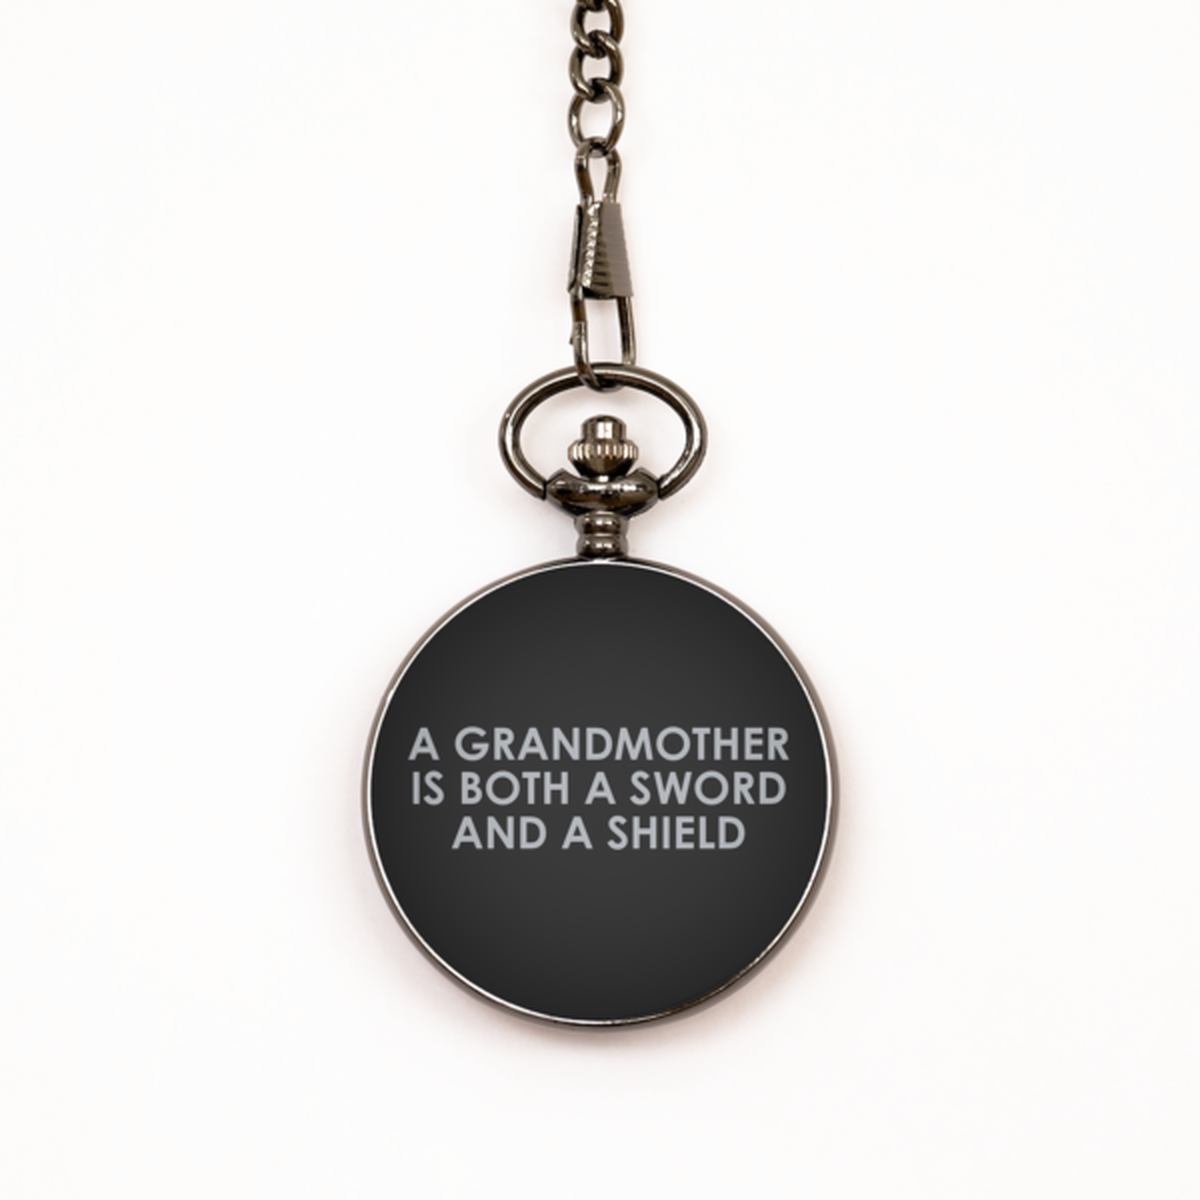 To My Grandma  Black Pocket Watch, Sword And A Shield, Valentines Gifts For Grandma From Granddaughter, Birthday Gifts For Women